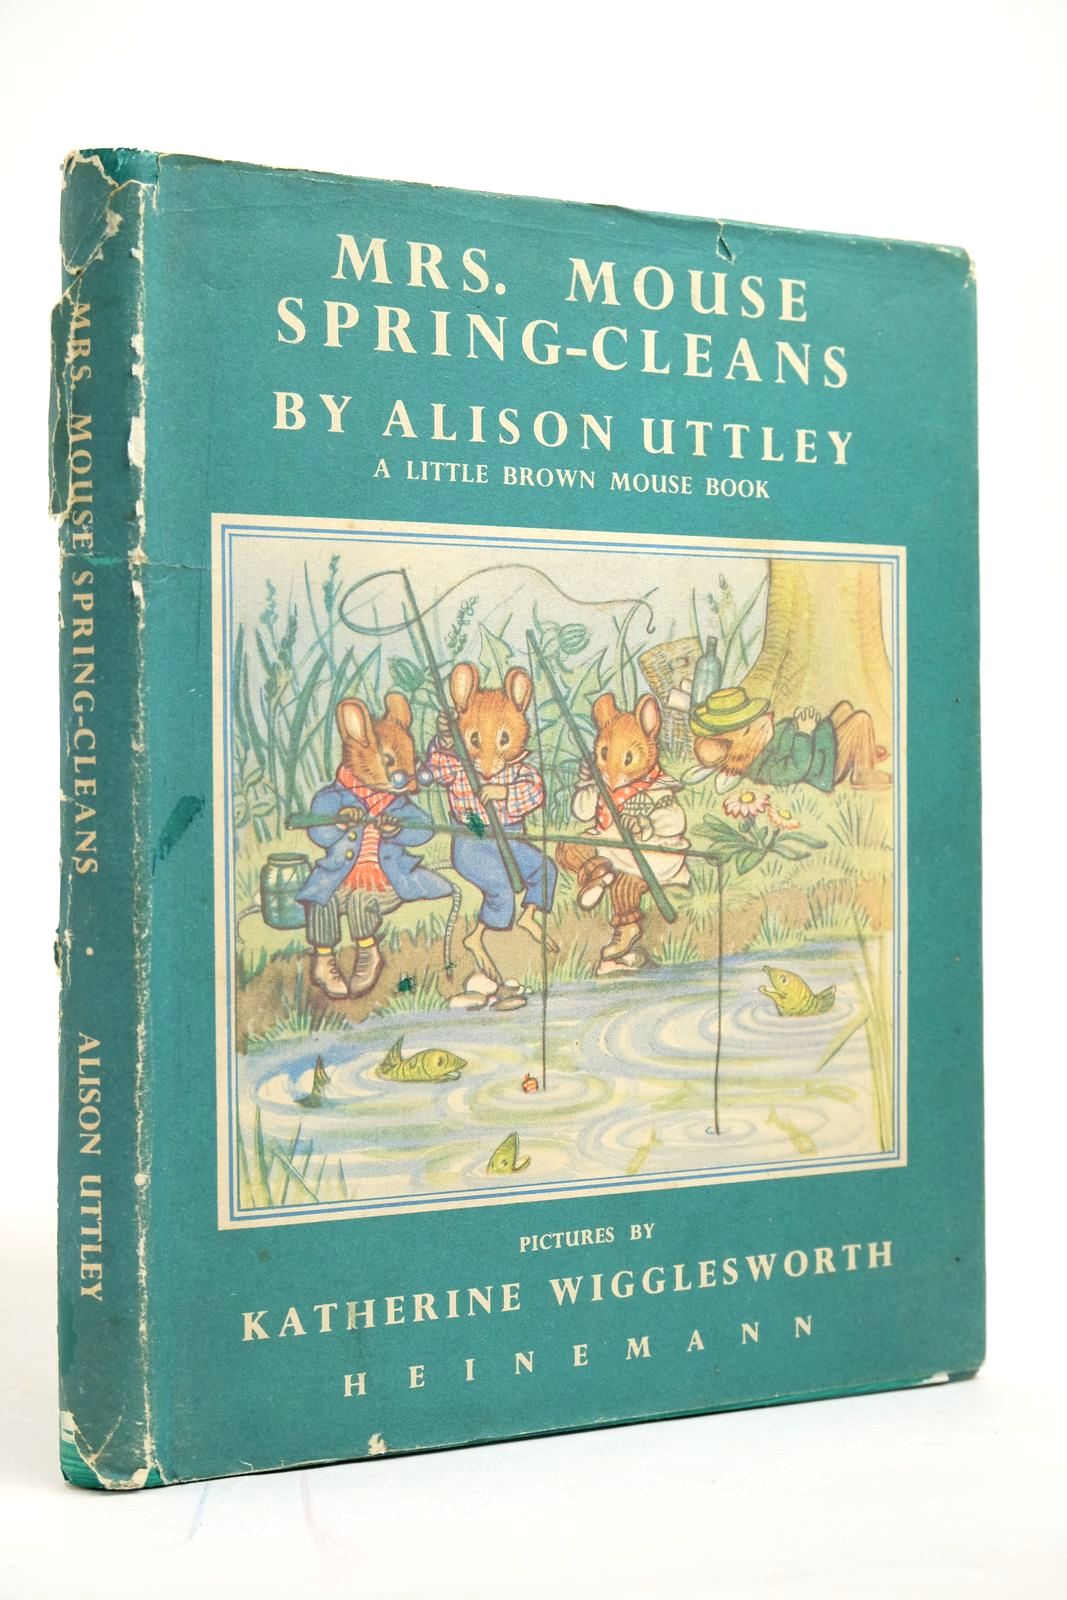 Photo of MRS. MOUSE SPRING-CLEANS written by Uttley, Alison illustrated by Wigglesworth, Katherine published by William Heinemann Ltd. (STOCK CODE: 2135096)  for sale by Stella & Rose's Books